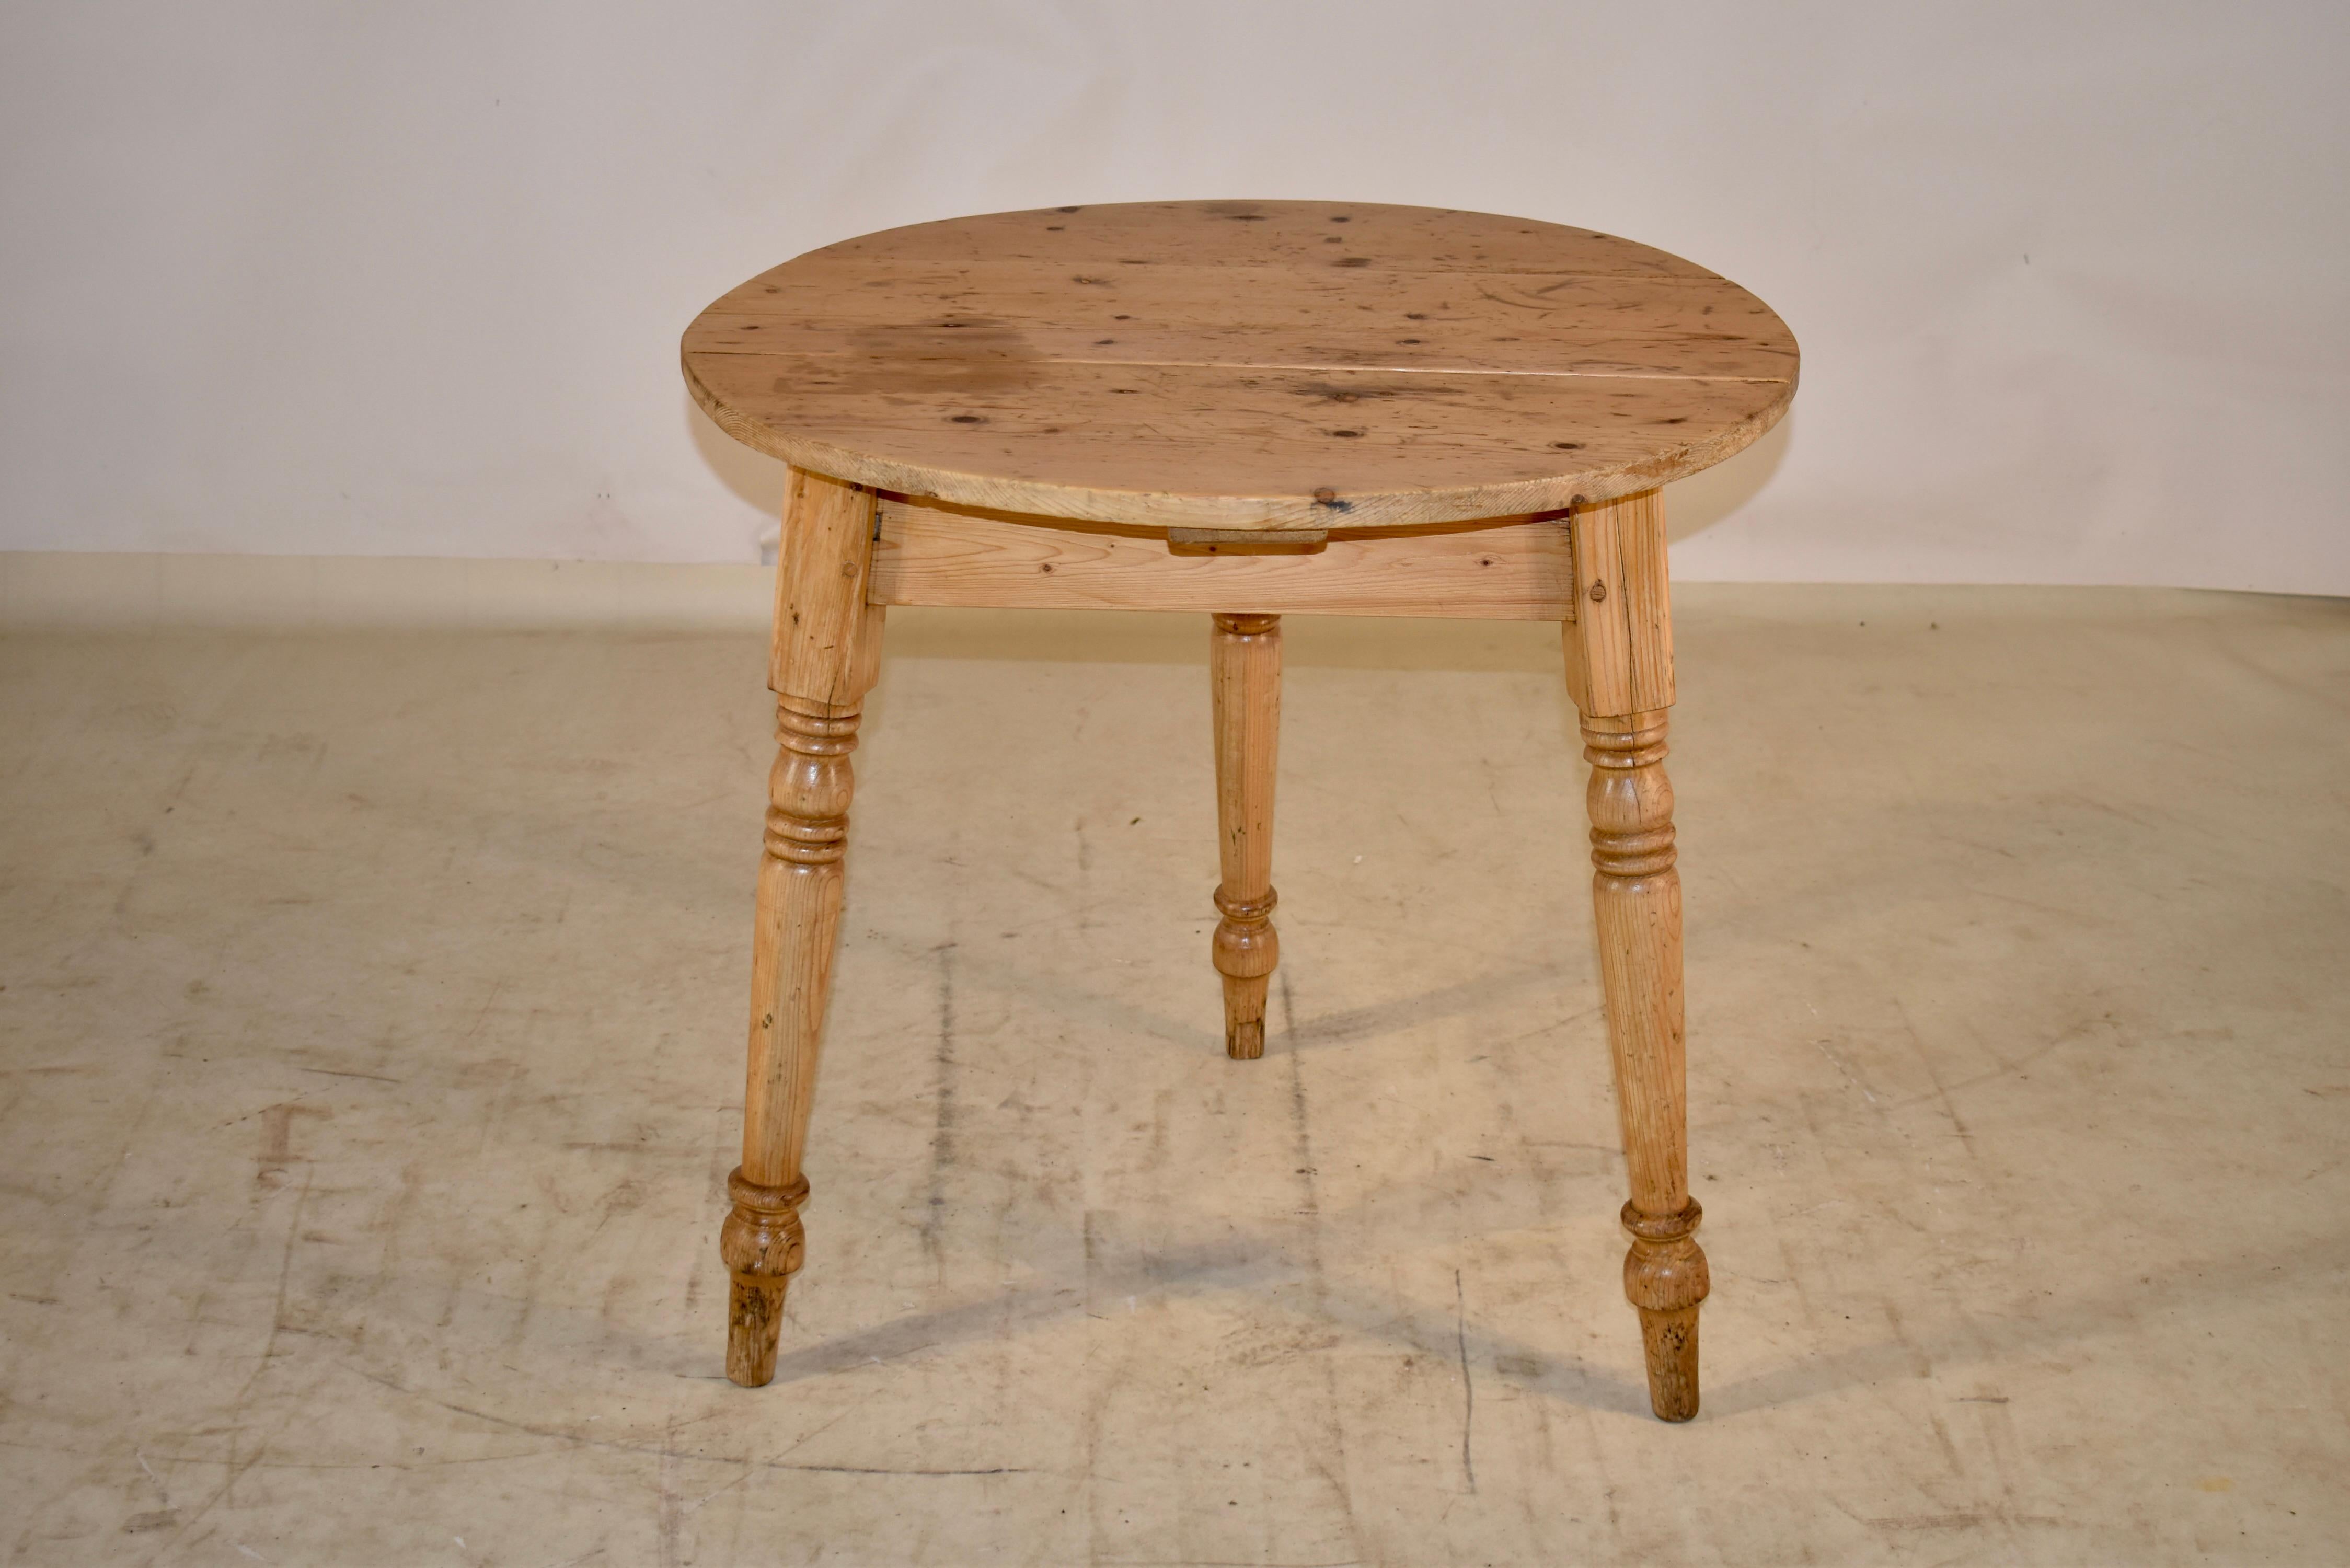 19th century pine cricket table from England.  The top is made from planks and has pegged construction.  The top is supported on a simple apron and splayed legs which have been hand turned. The table top has wonderful markings to support its age and